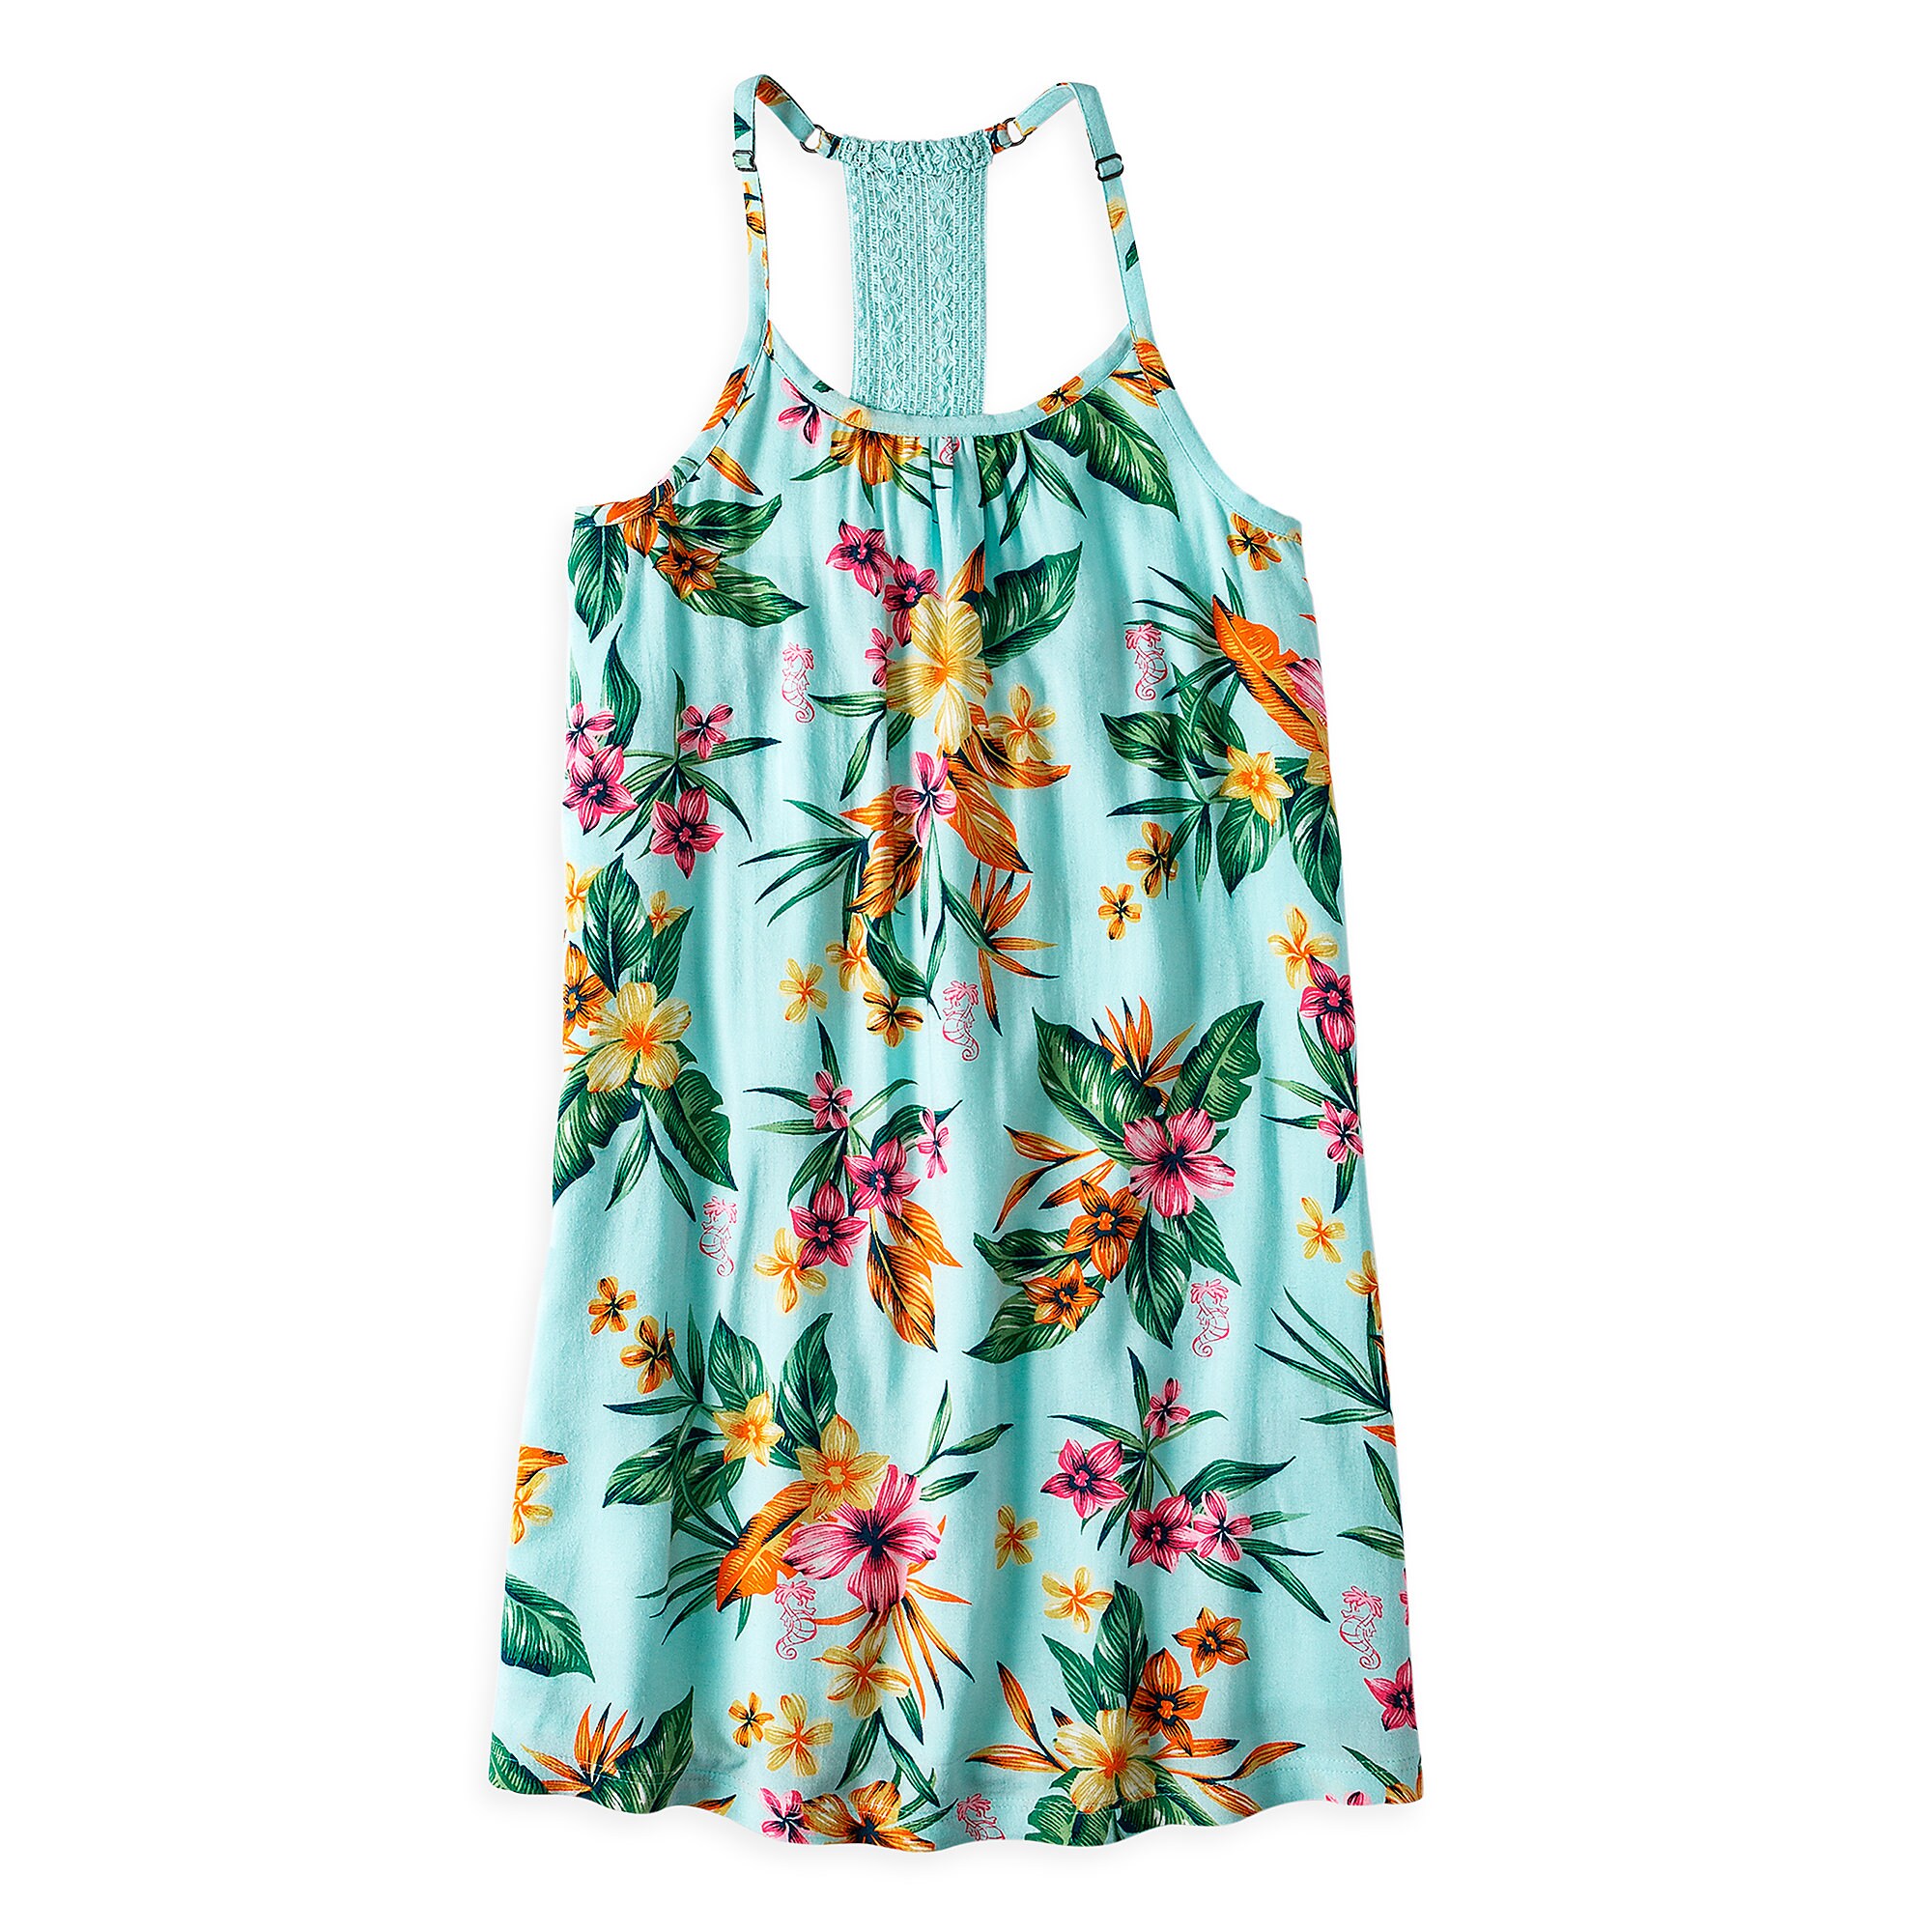 The Little Mermaid Racerback Dress for Girls by ROXY Girl is available ...